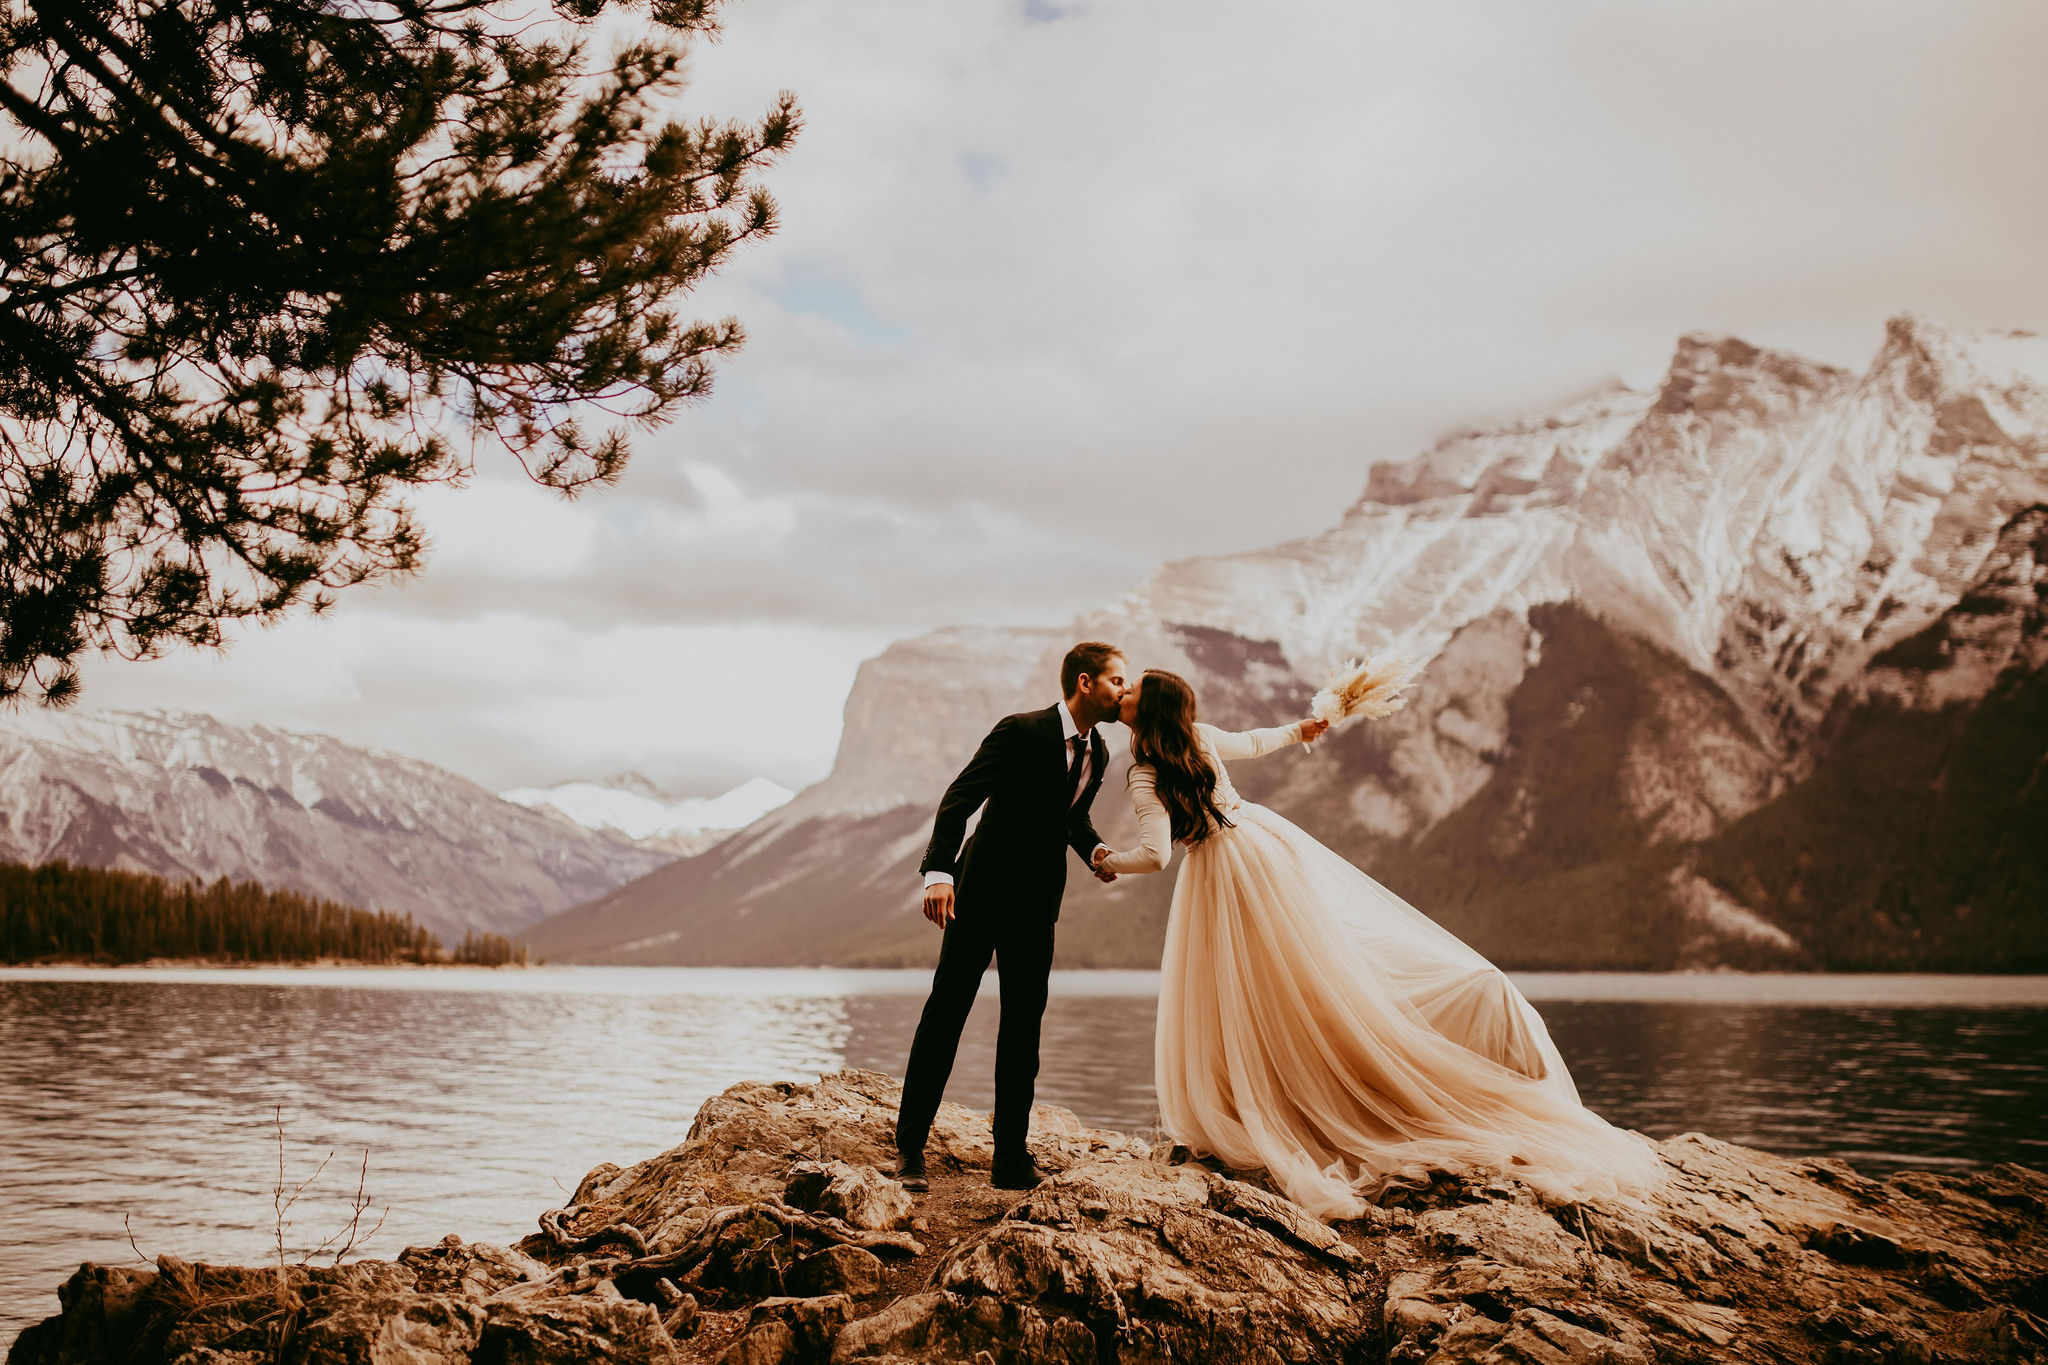 A bride and groom kiss in front of a glacier lake, without the mountains of Banff, Canada behind them.